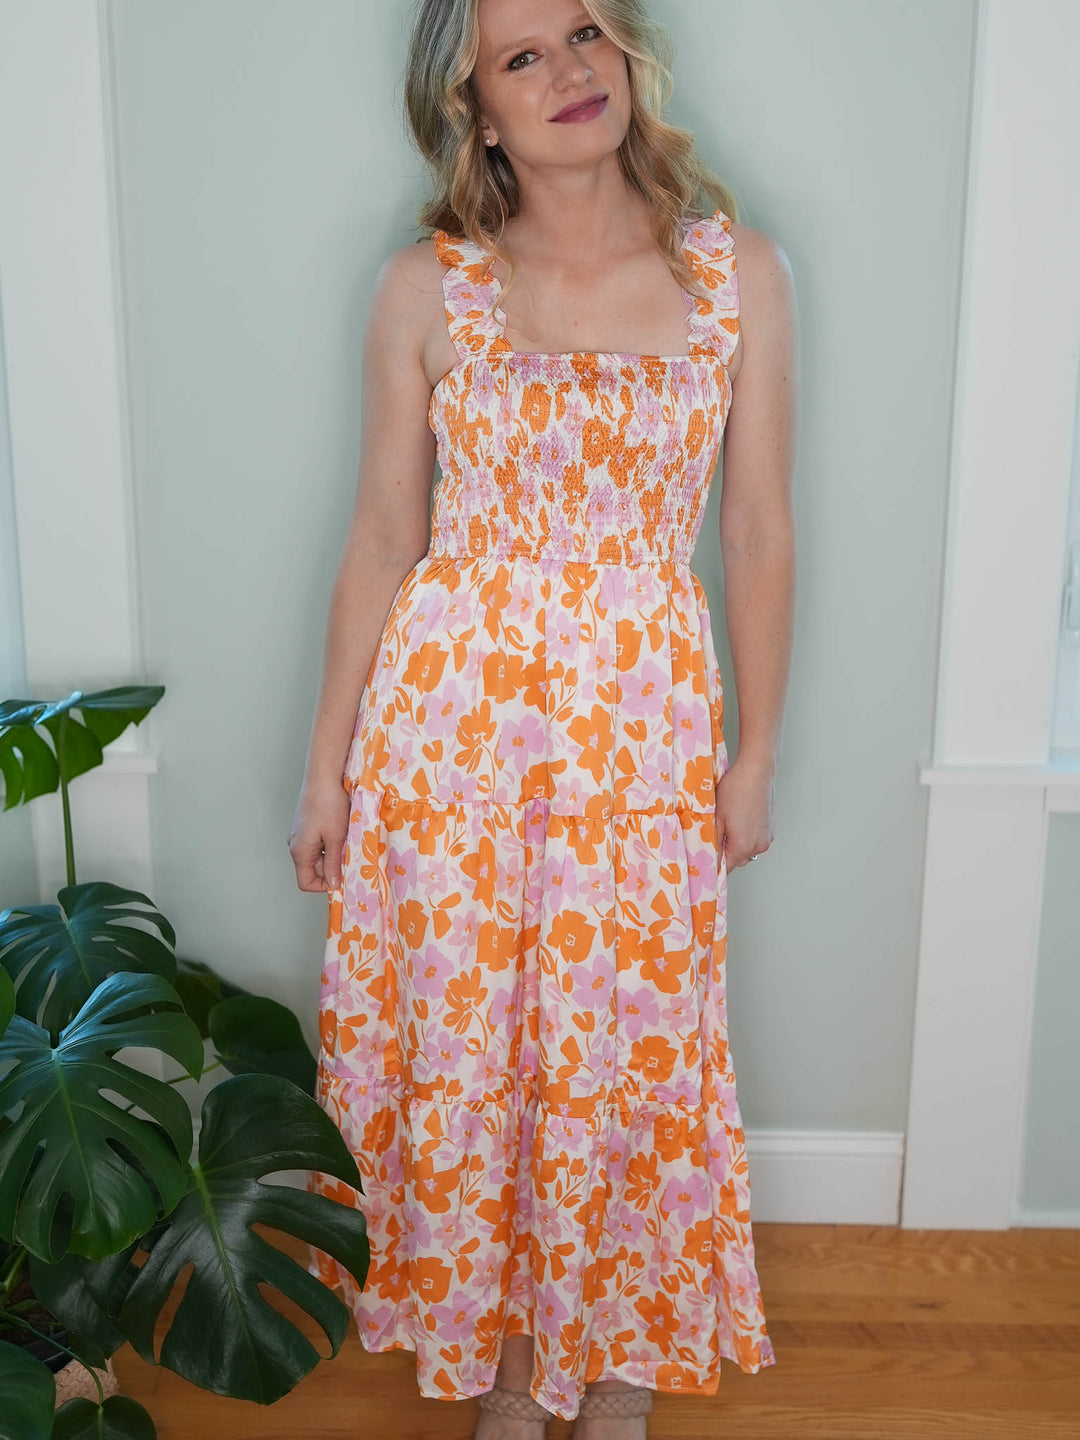 Smocked Floral Dress with Orange and Pink Flowers